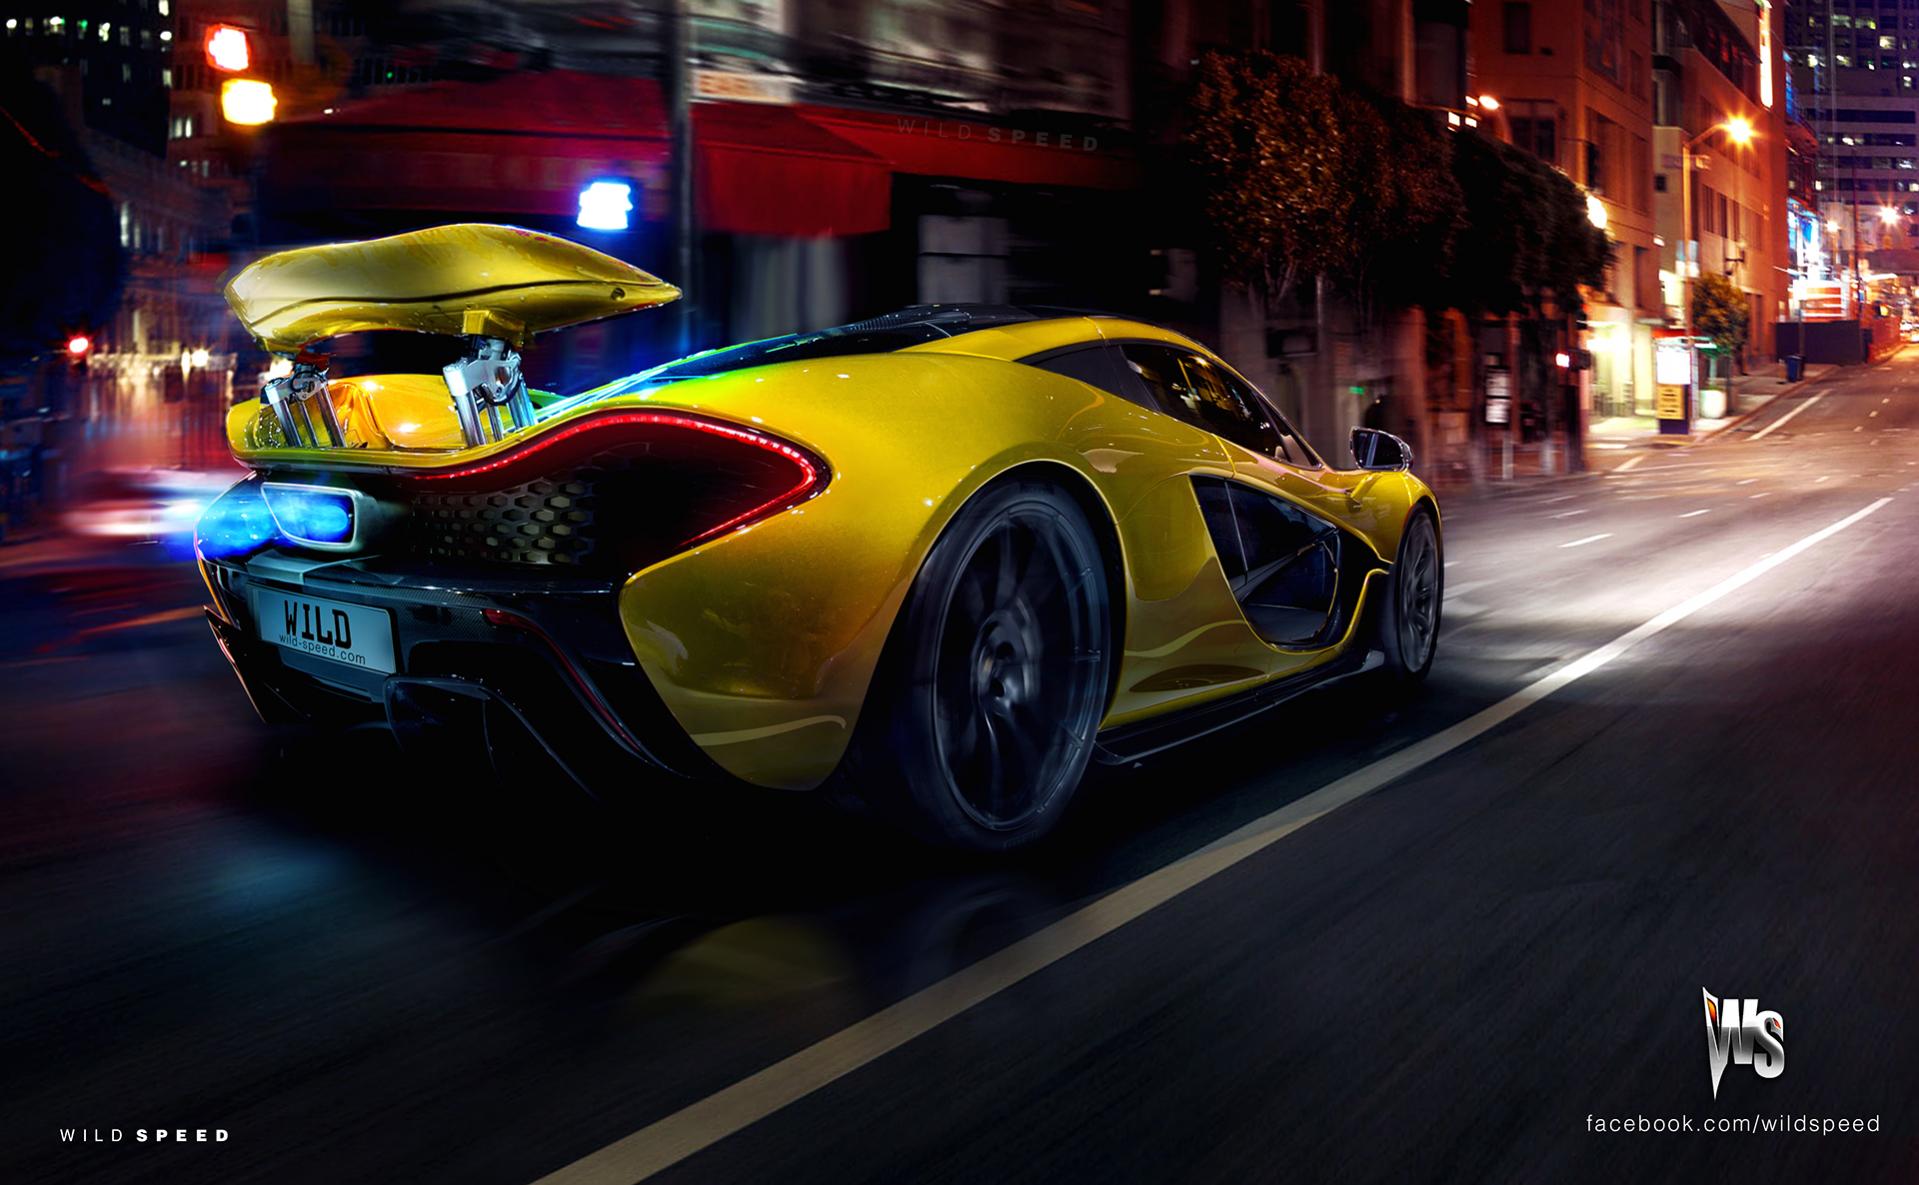 Nom : yellow-mclaren-p1-spitting-flames-looks-extreme_1.jpg
Affichages : 367
Taille : 210,2 Ko